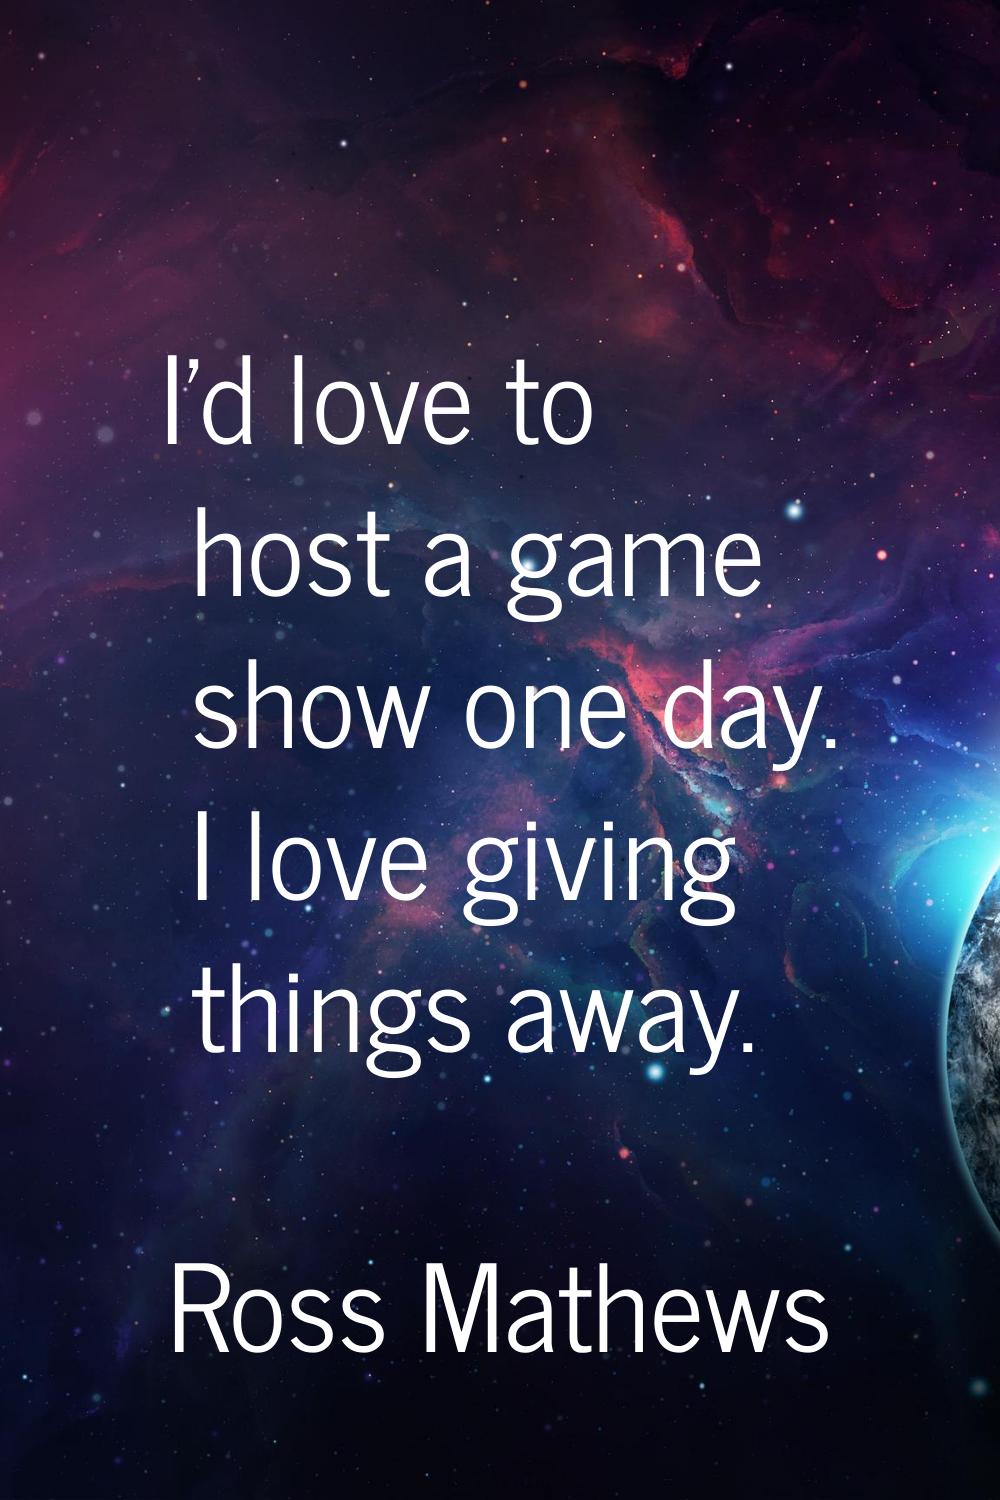 I'd love to host a game show one day. I love giving things away.